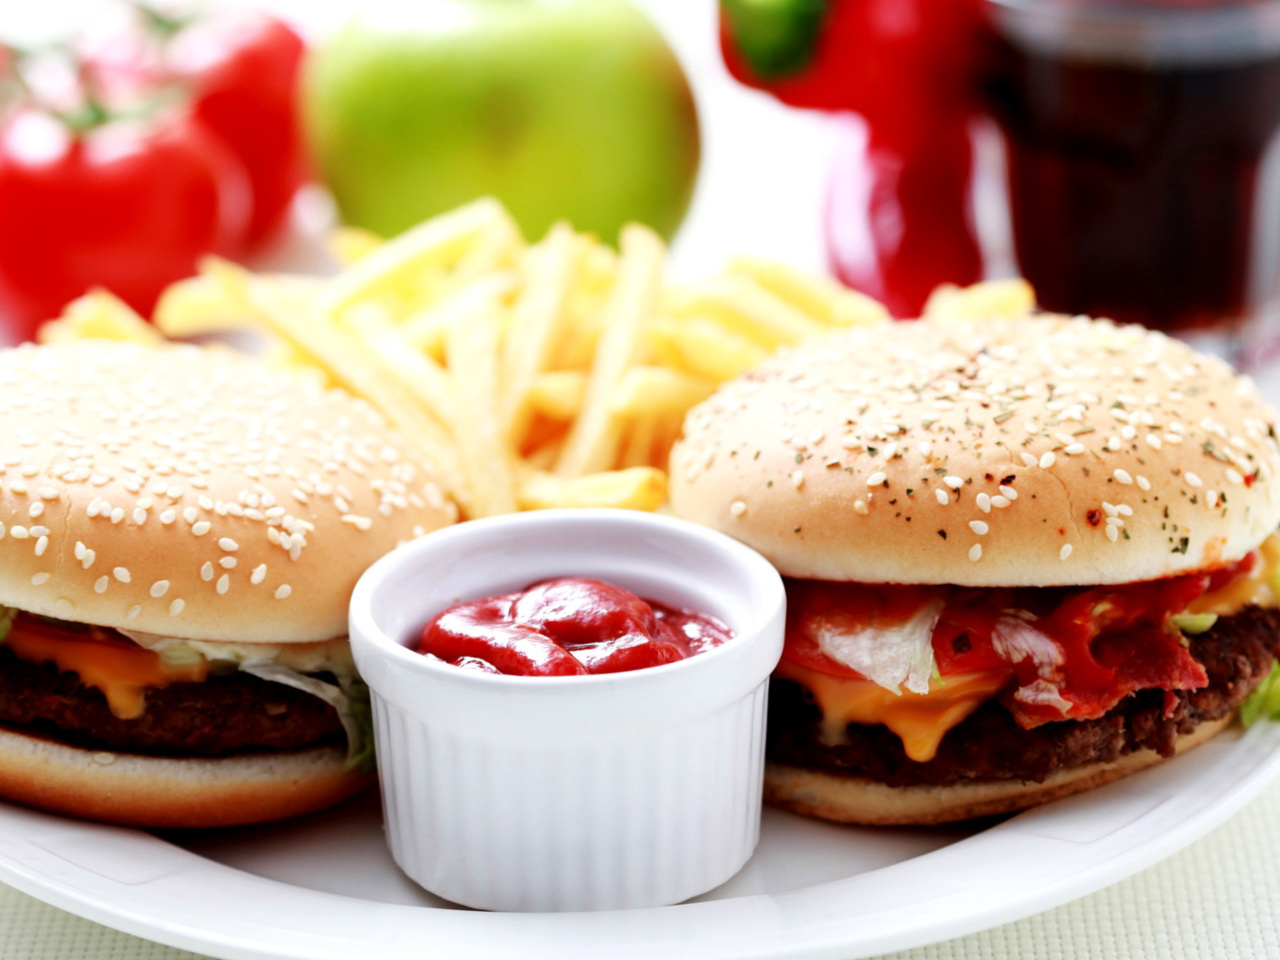 Burgers with Barbecue sauce wallpaper 1280x960